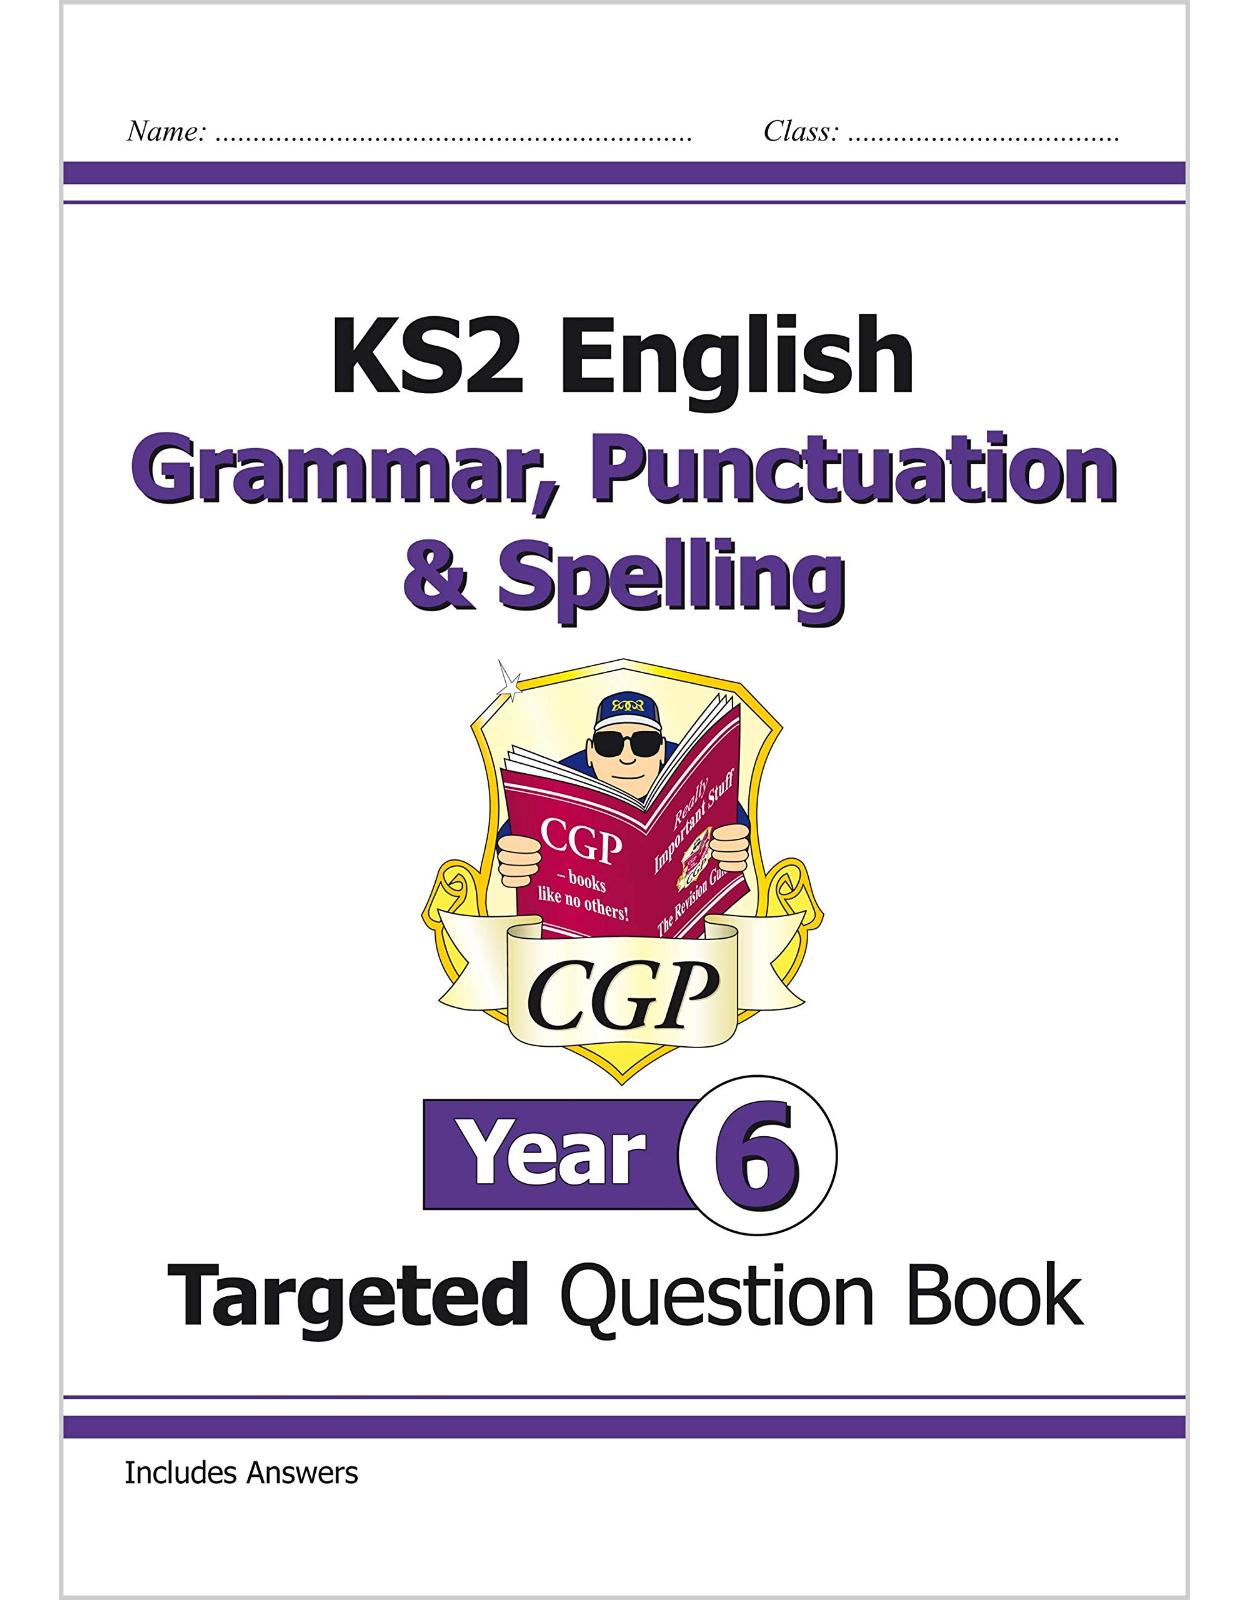 KS2 English Targeted Question Book: Grammar, Punctuation & Spelling - Year 6 (CGP KS2 English) 